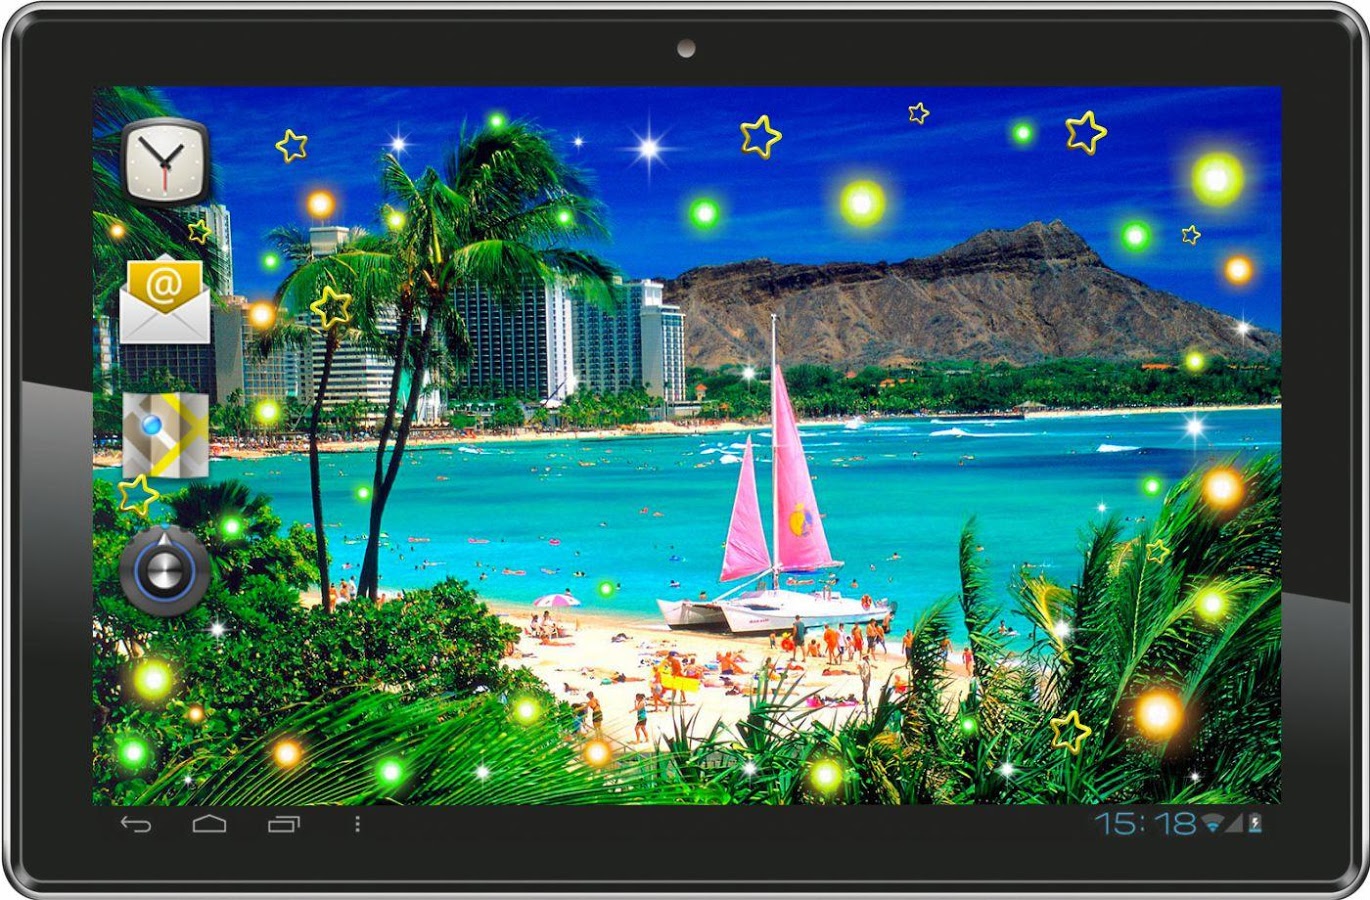 Hawaii Beach Live Wallpaper Android Apps On Google Play